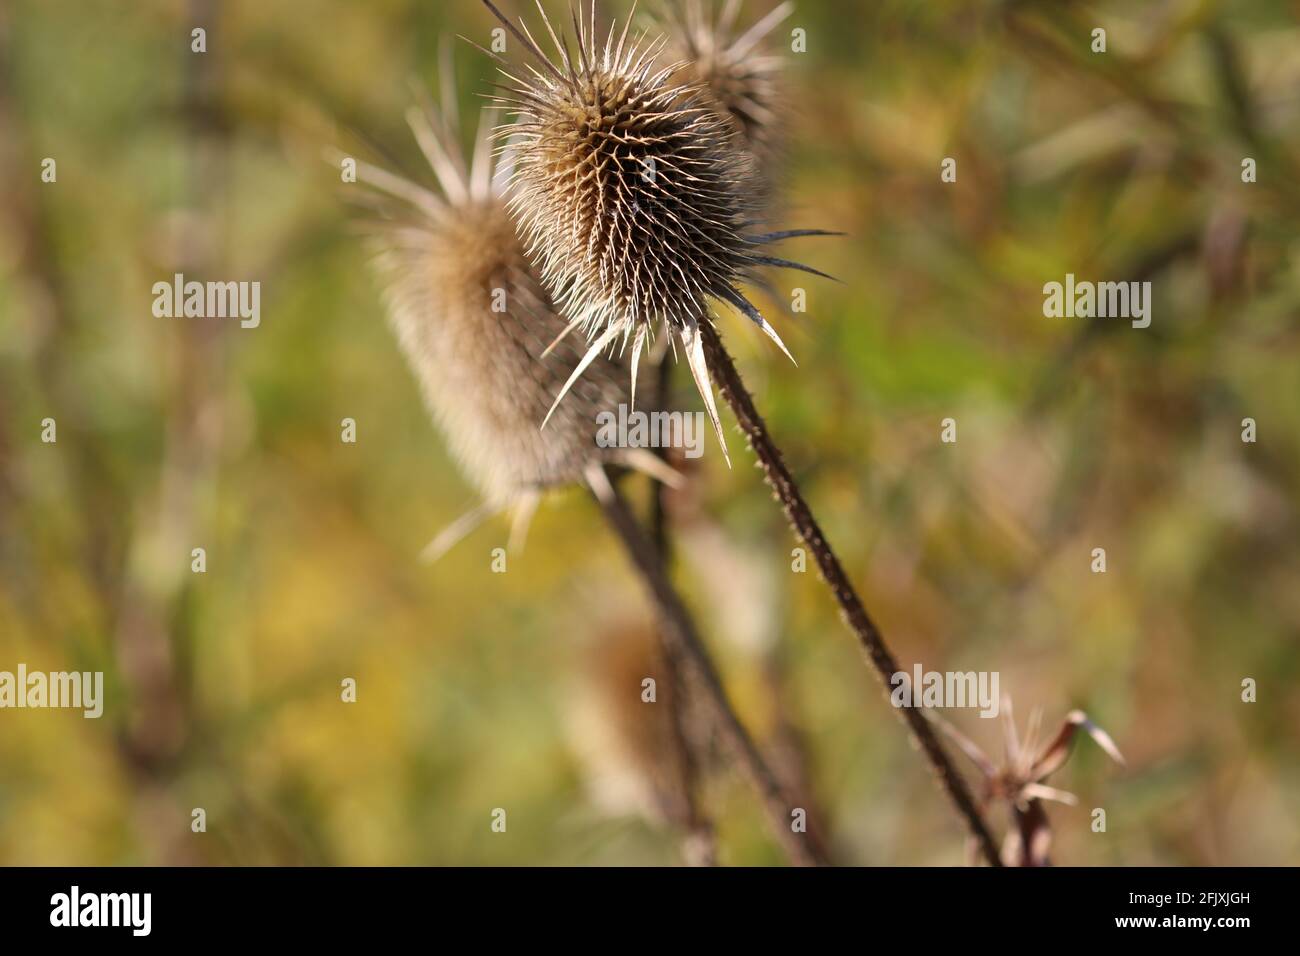 Thistle dried seed pod group outdoors Stock Photo